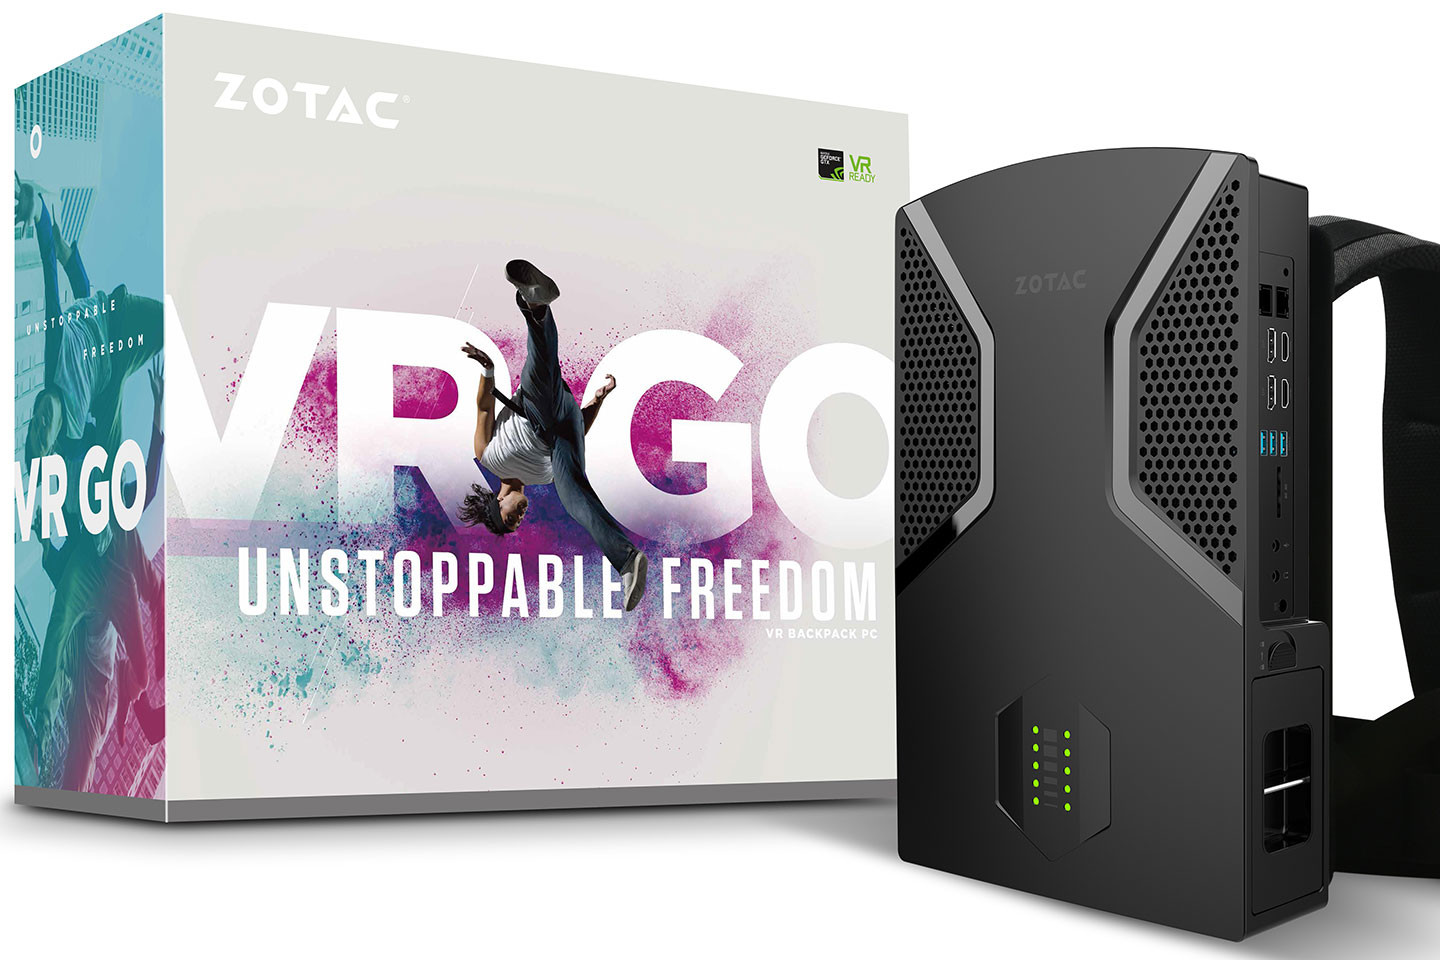 Zotac Announces VR GO Backpack PC for More Immersive VR Experiences